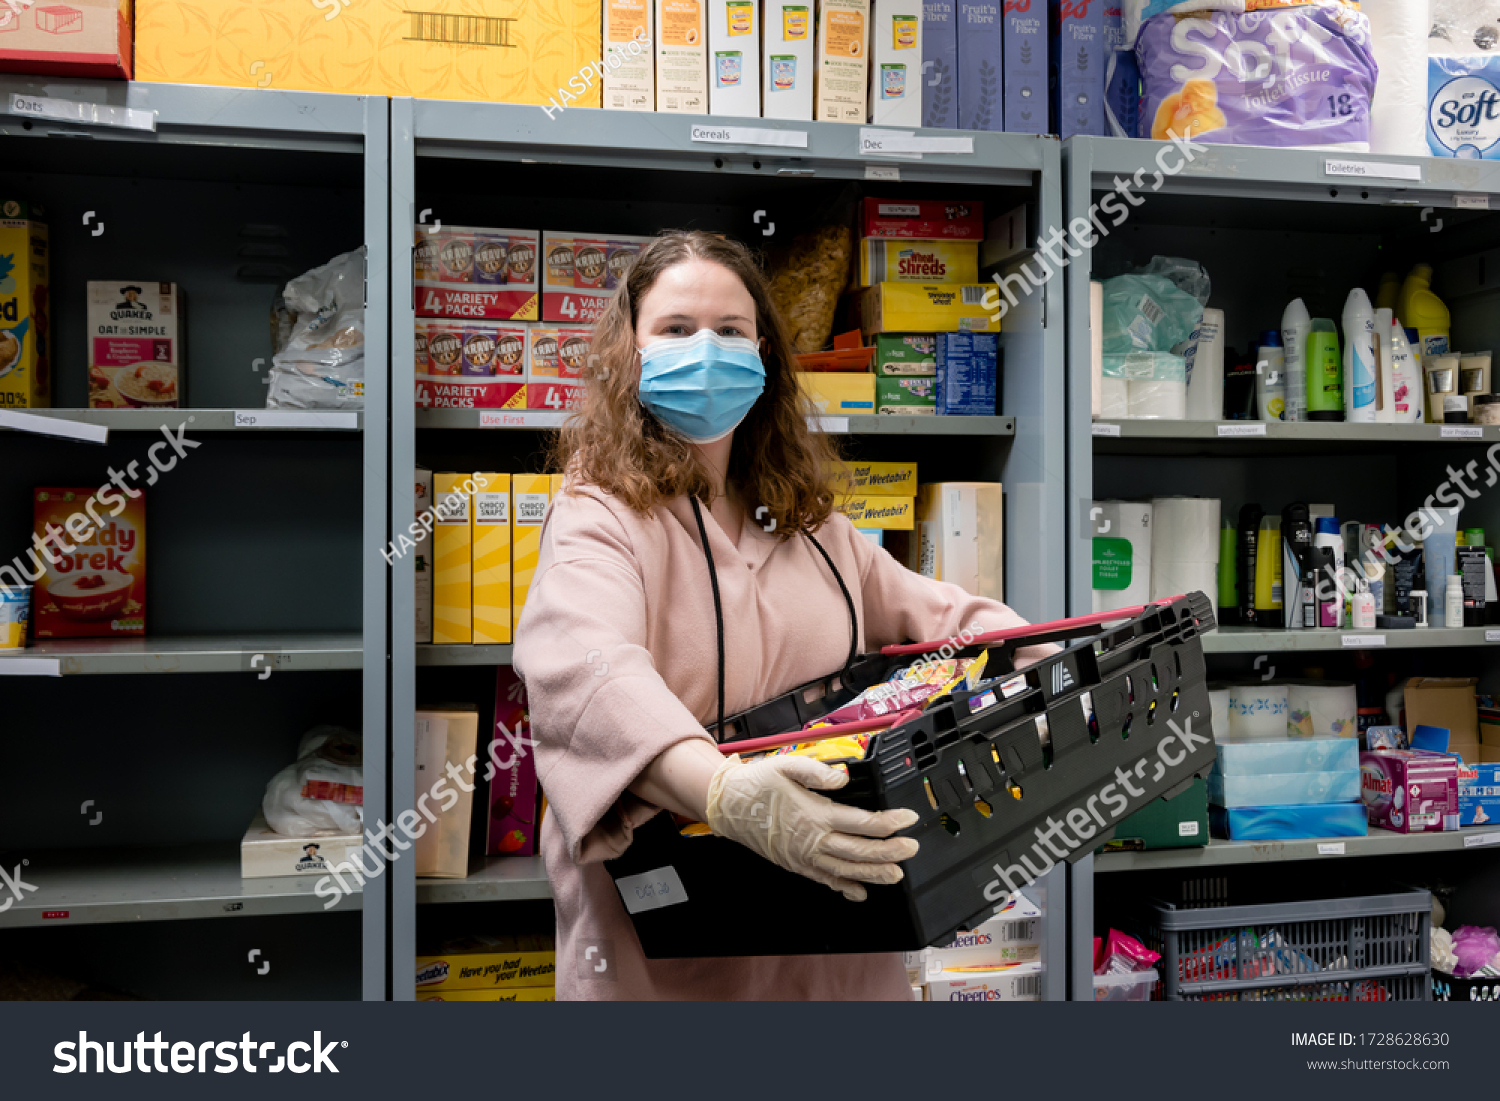 Stock Photo Rotherham Uk May A Volunteer At A Trussell Trust Food Bank Wears Gloves And Face Mask 1728628630 